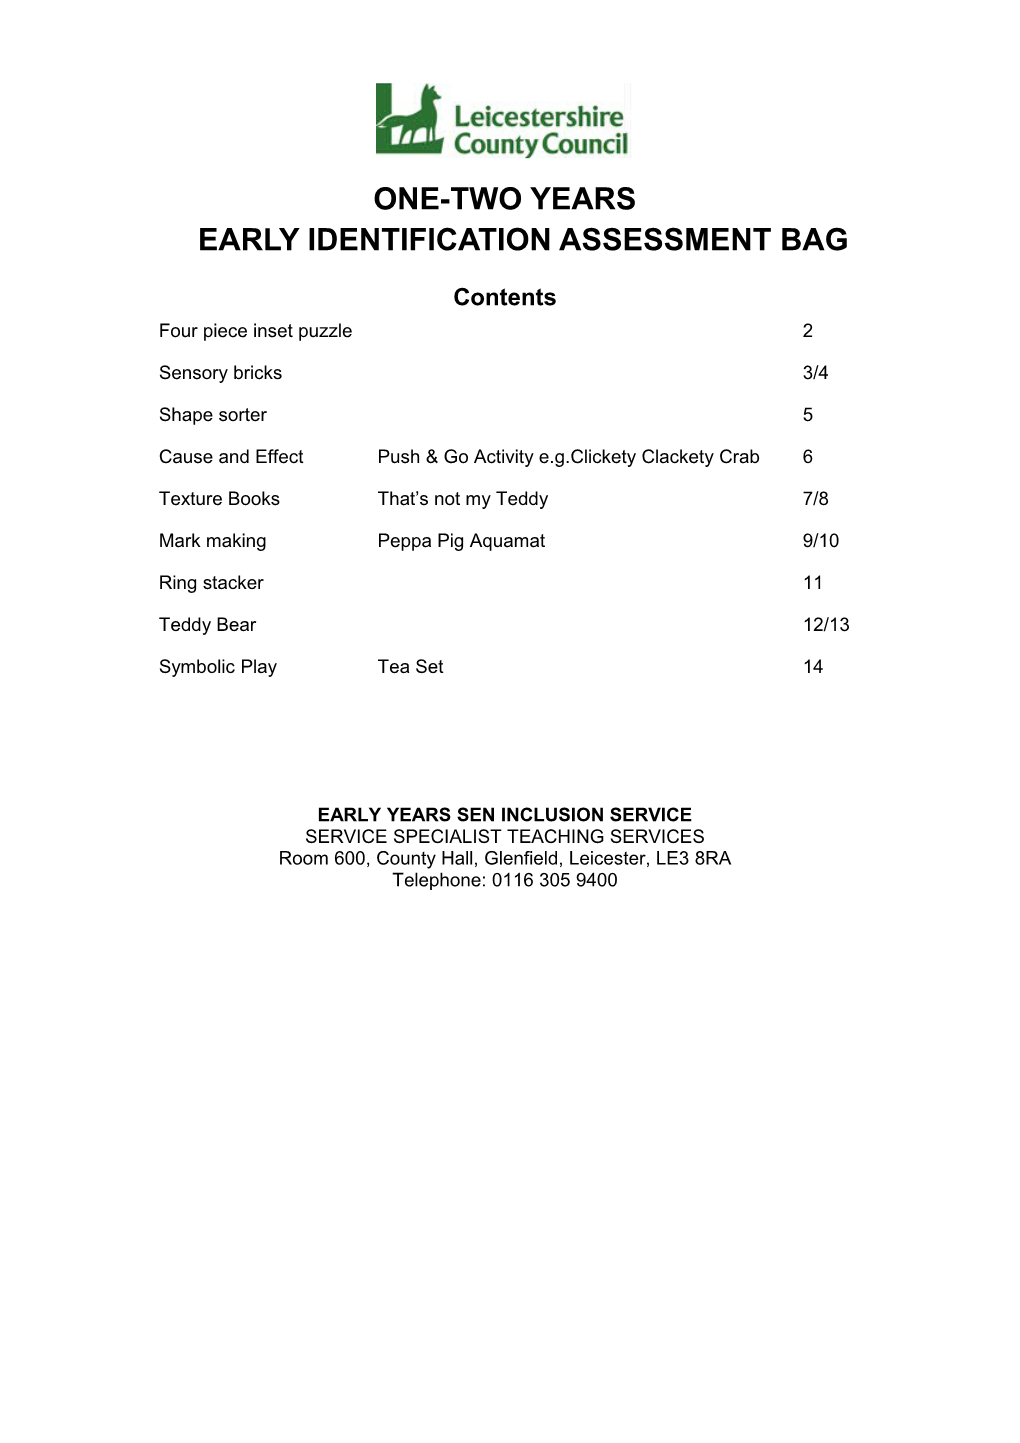 One to Two Years Early Identification Assessment Bag